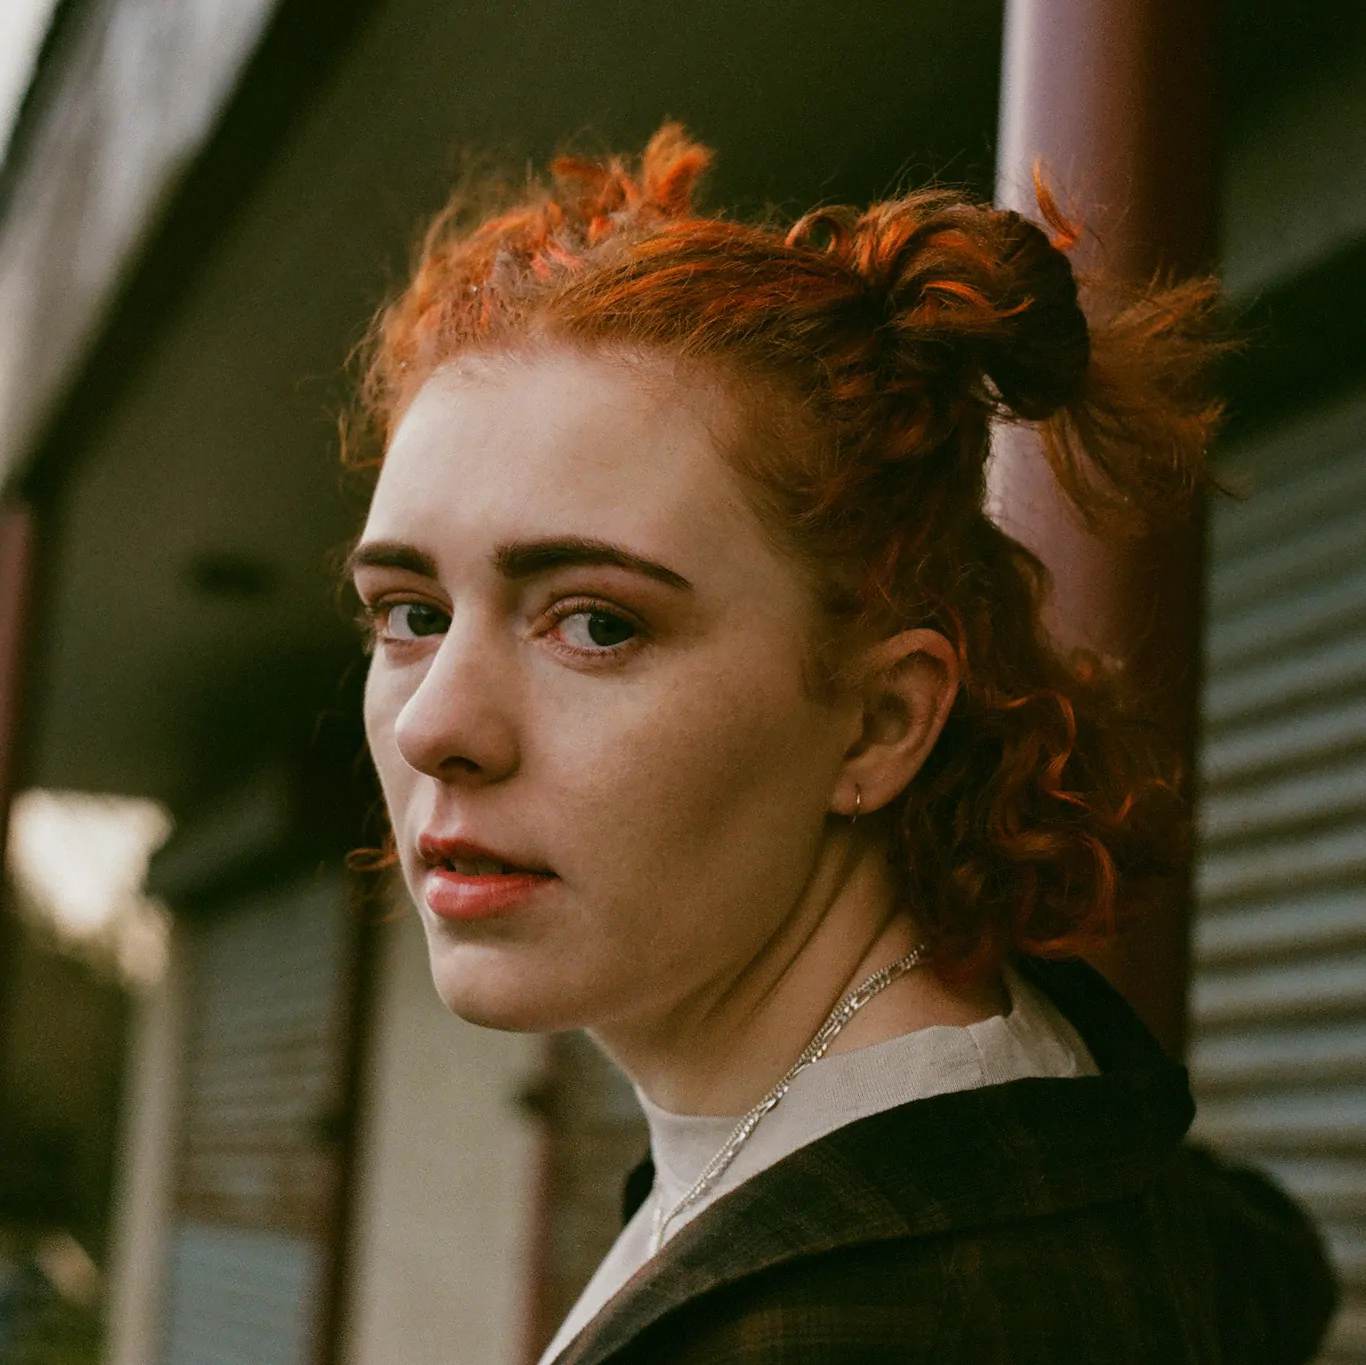 INTERVIEW: Derry songwriter ROE on the release of her debut album ’That’s When The Panic Sets In’